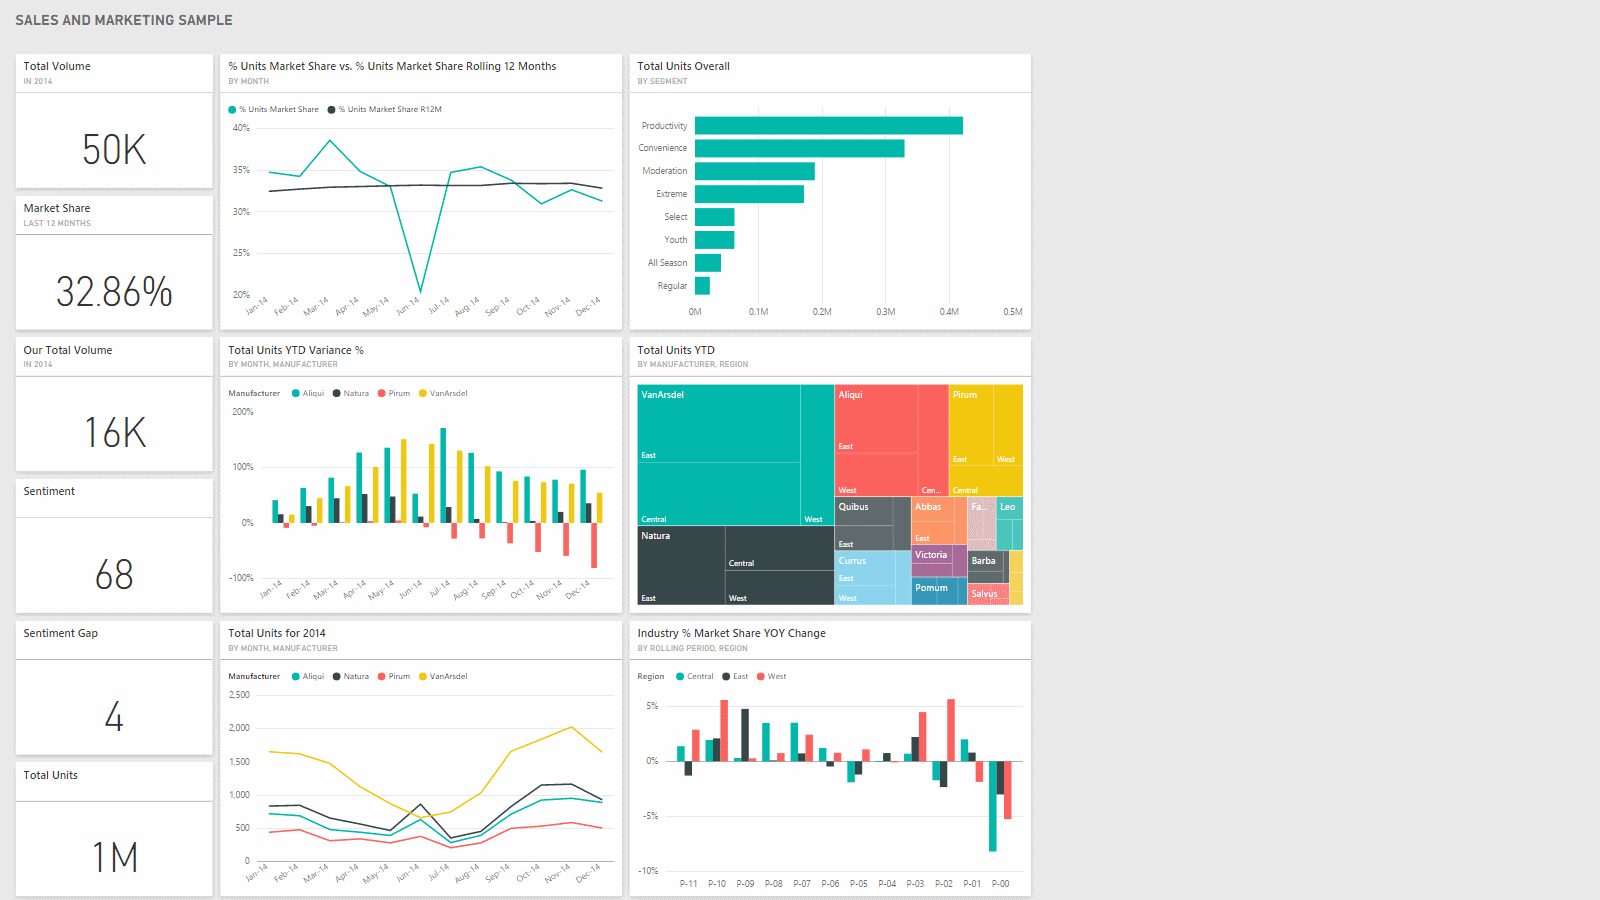 Dashboard: SALES AND MARKETING